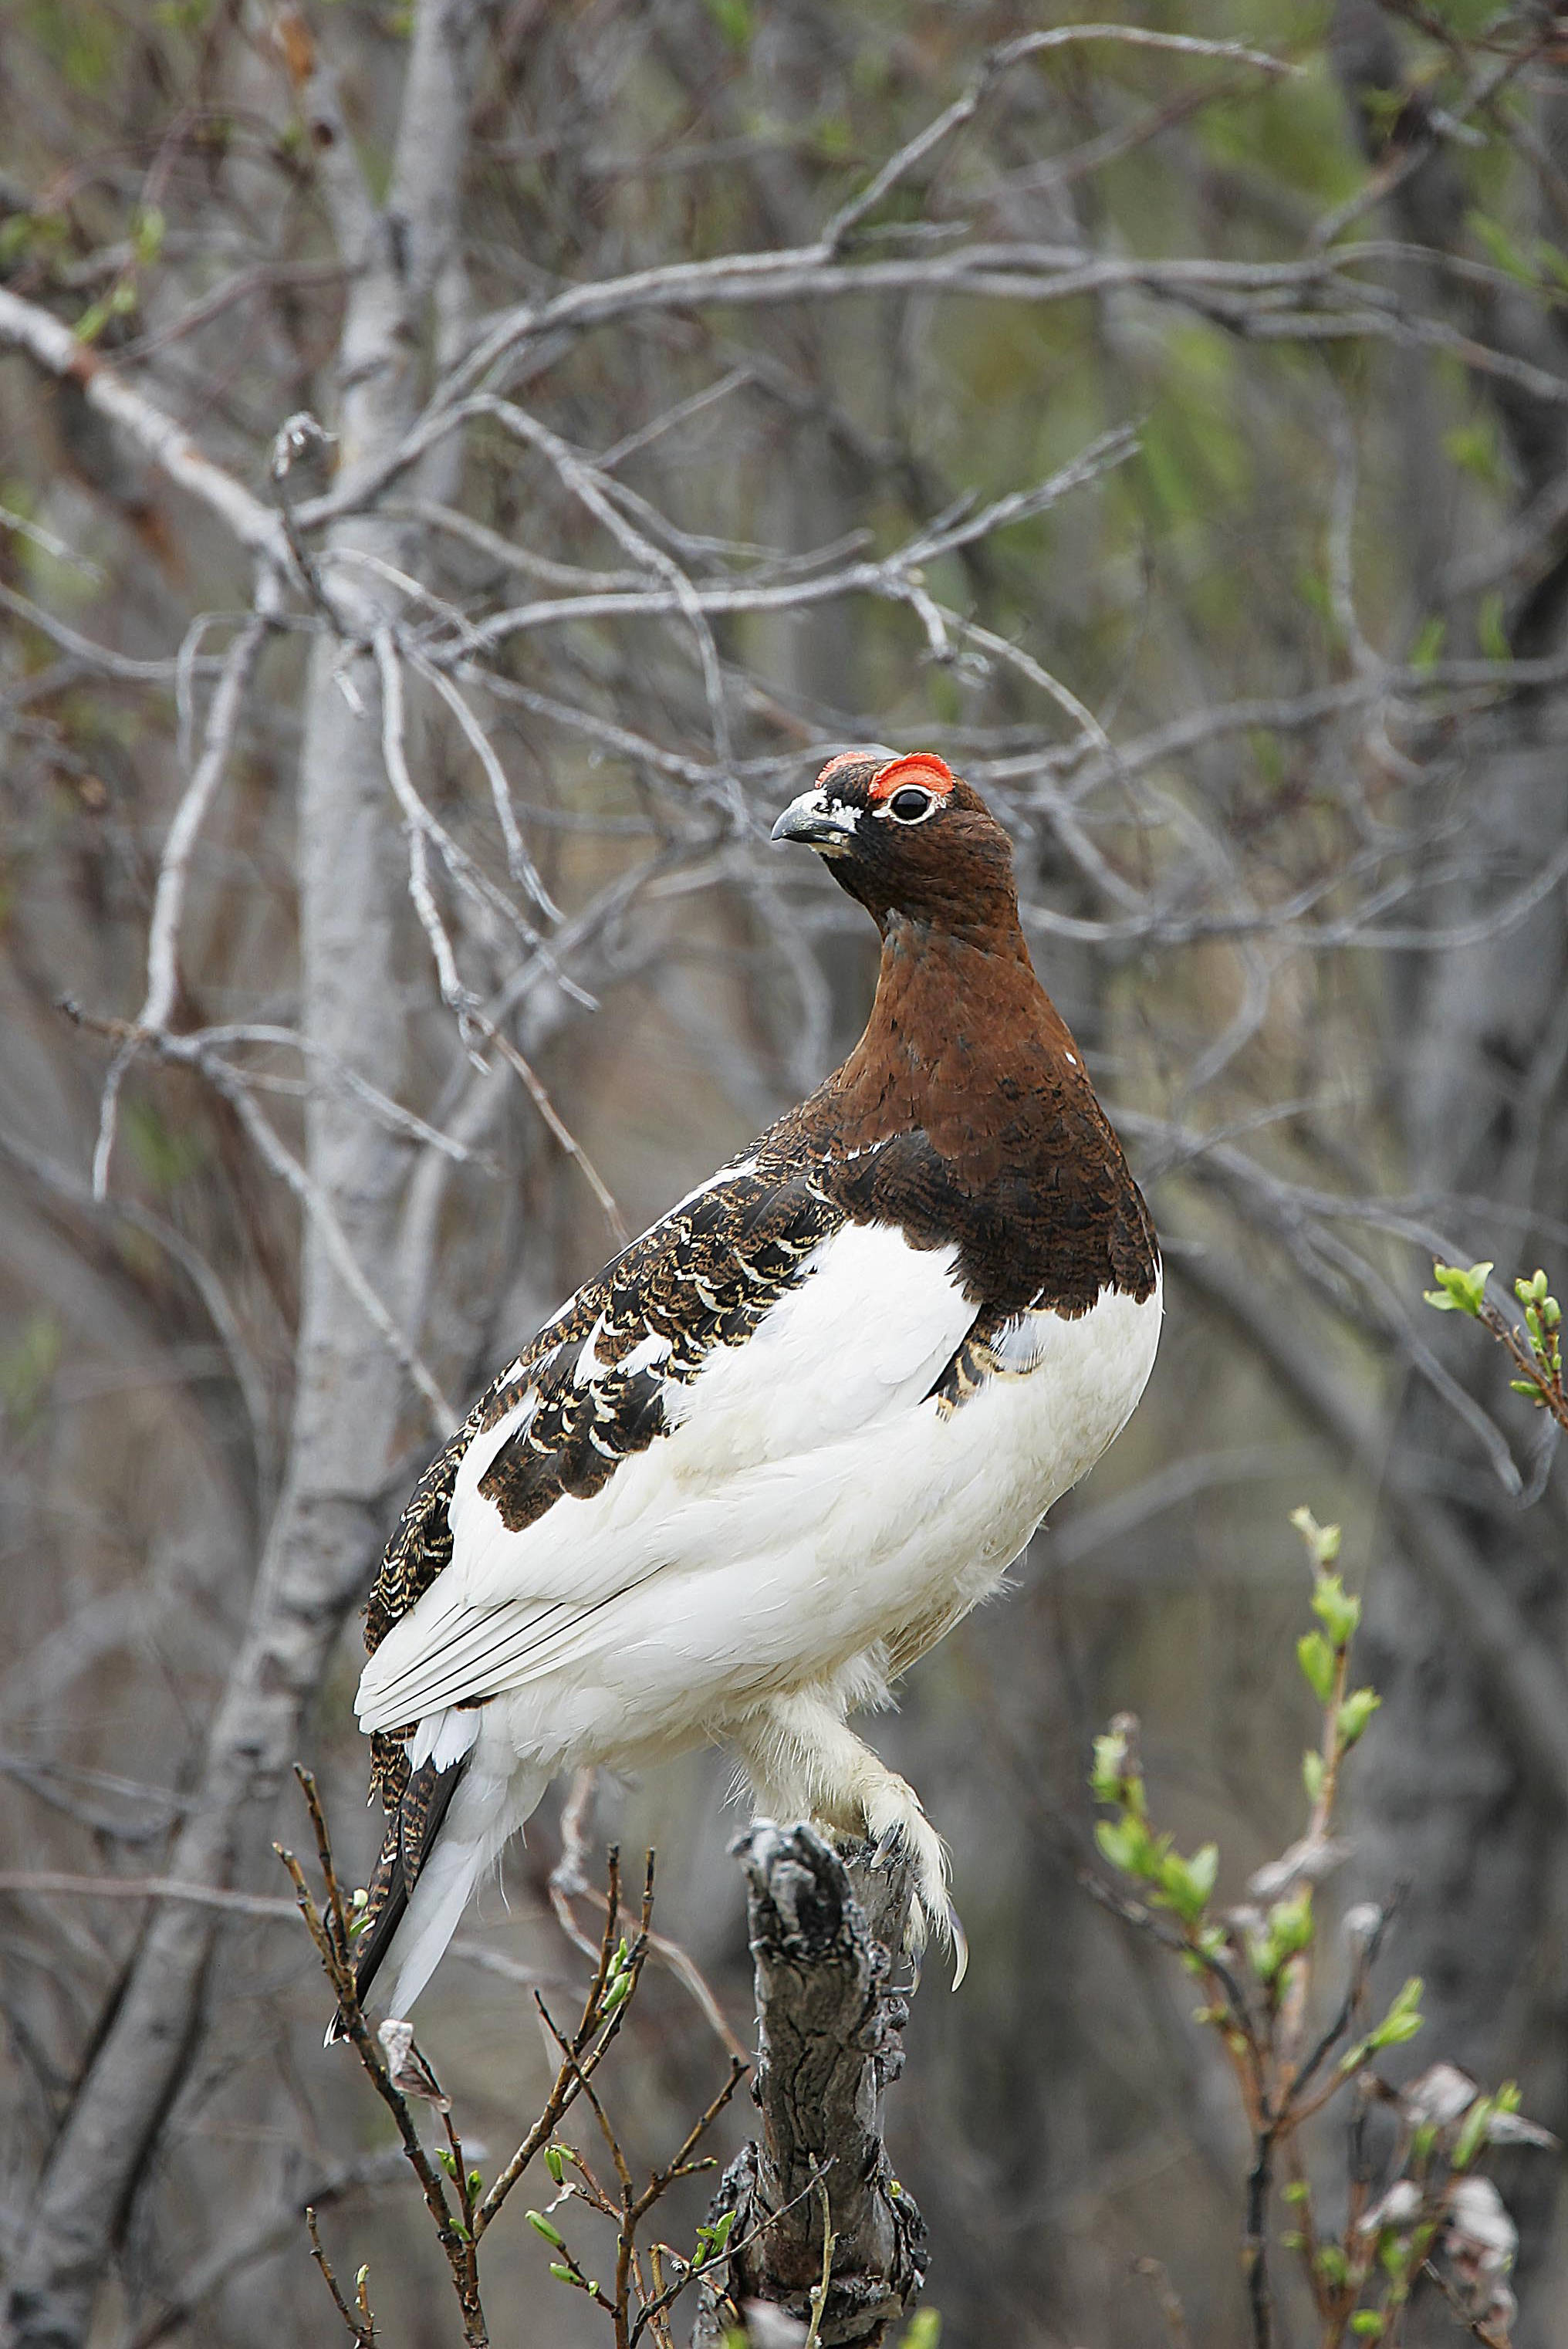 Alaska’s state bird, the willow ptarmigan, does not occur in any state other than Alaska. (Photo by Ted Swem, USFWS)